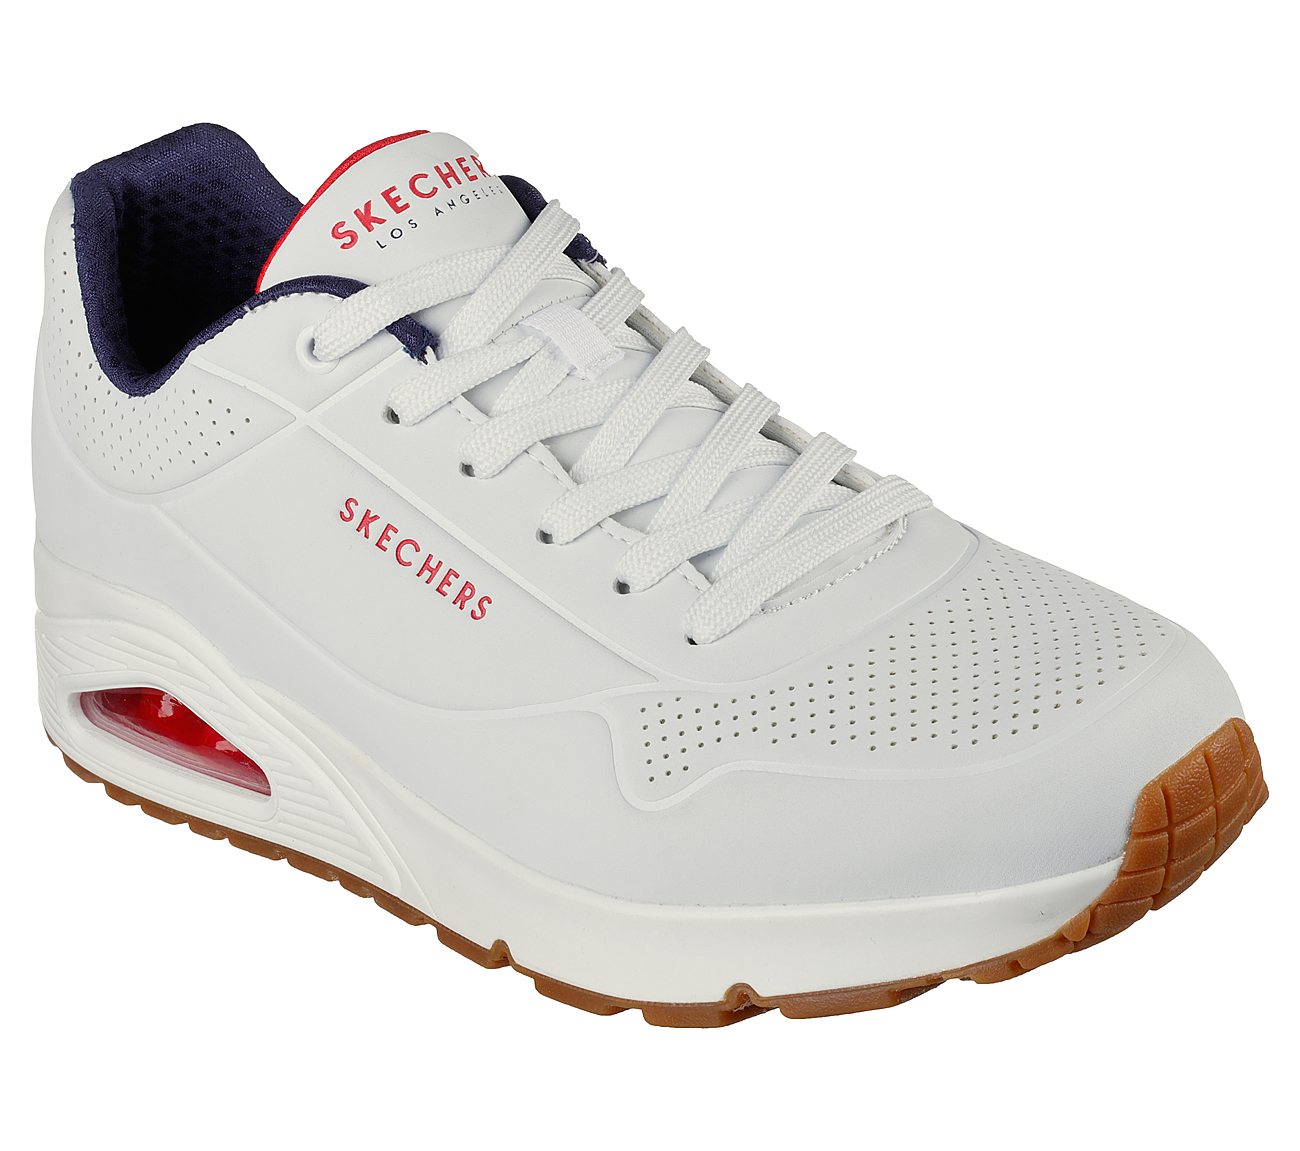 UNO - STAND ON AIR, WHITE/NAVY/RED Footwear Lateral View